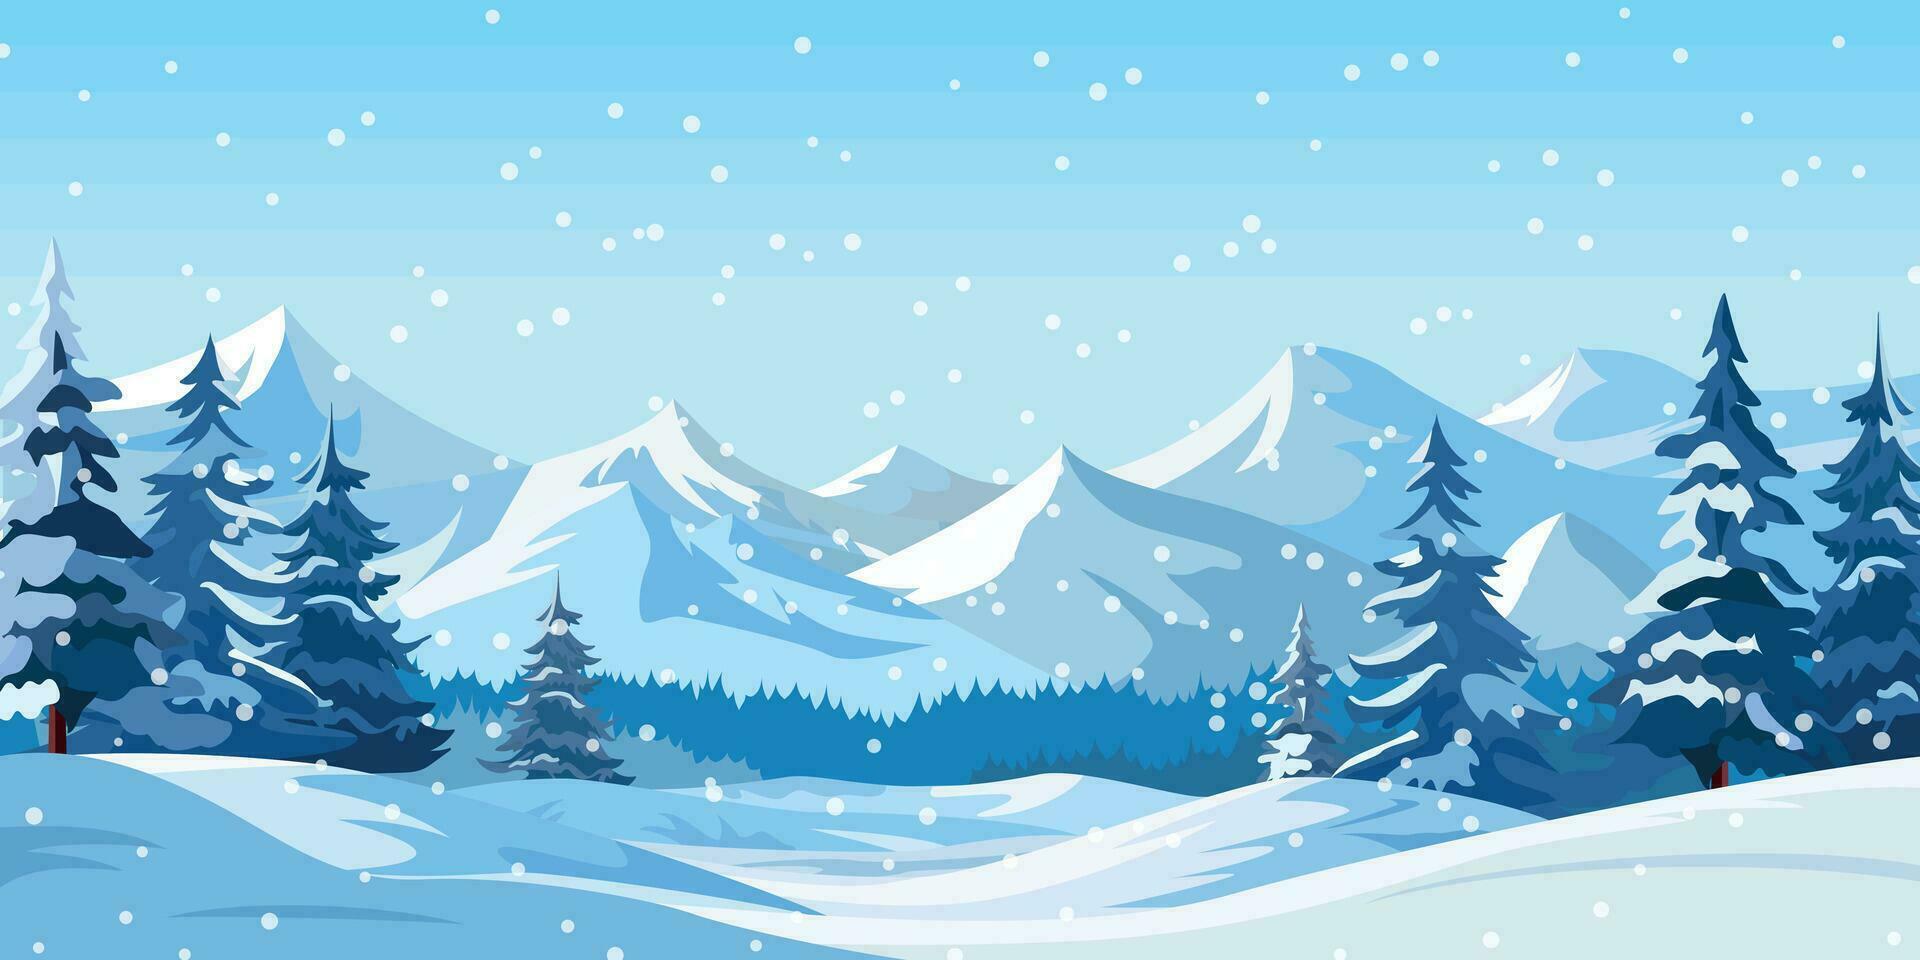 Vector illustration of flat winter mountain landscape with forest, snowdrifts and snowfall. Snowy weather background. Winter season.